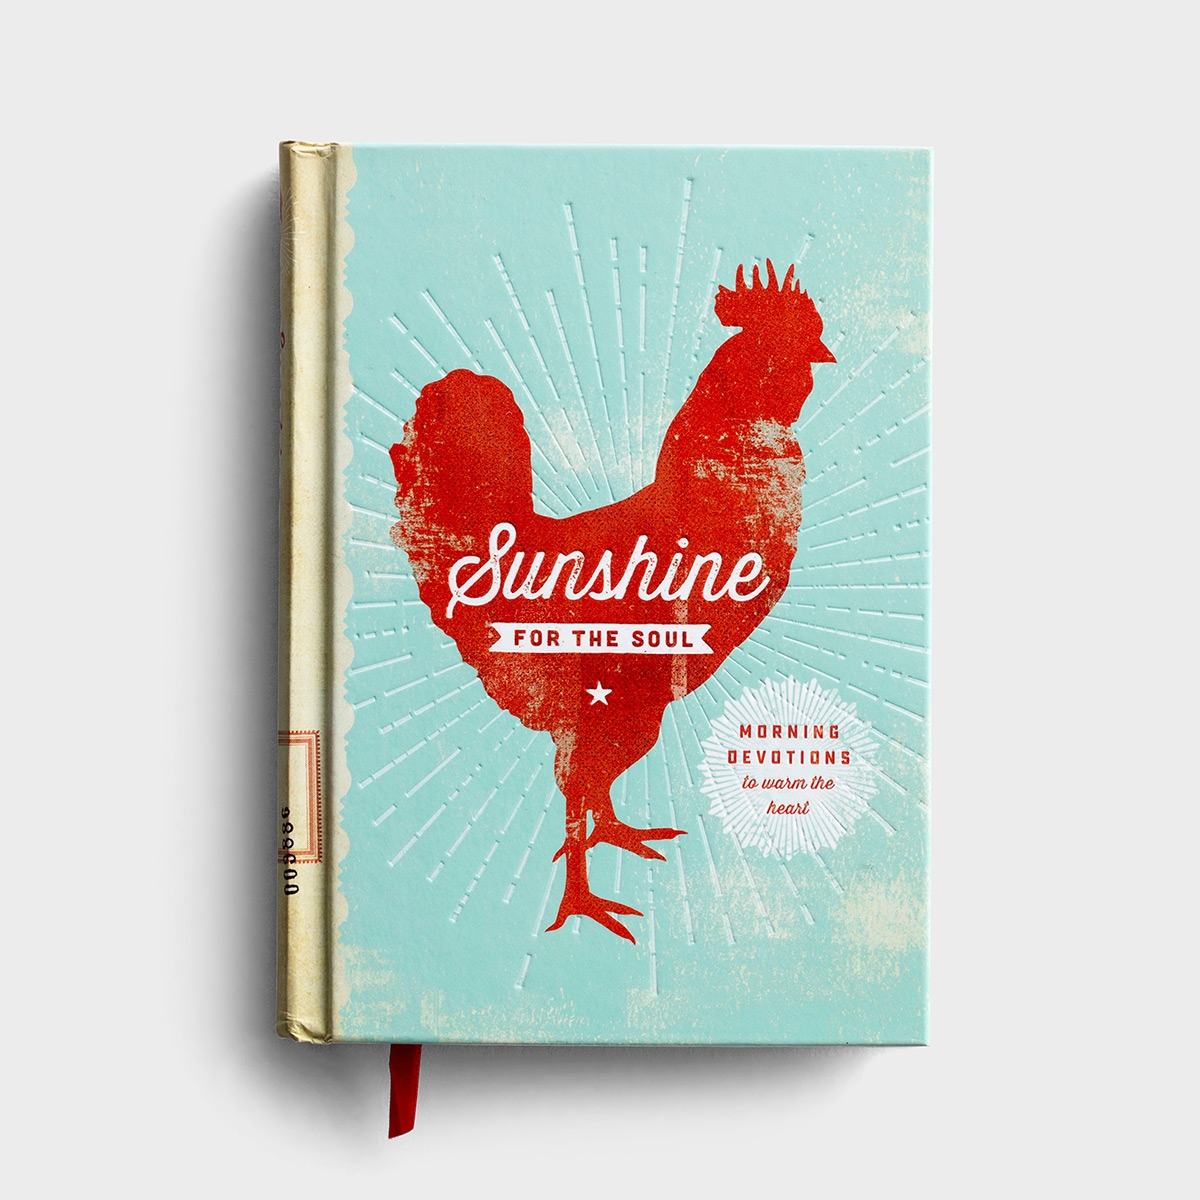 Sunshine for the Soul: Morning Devotions to Warm the Heart - Devotional Gift Book